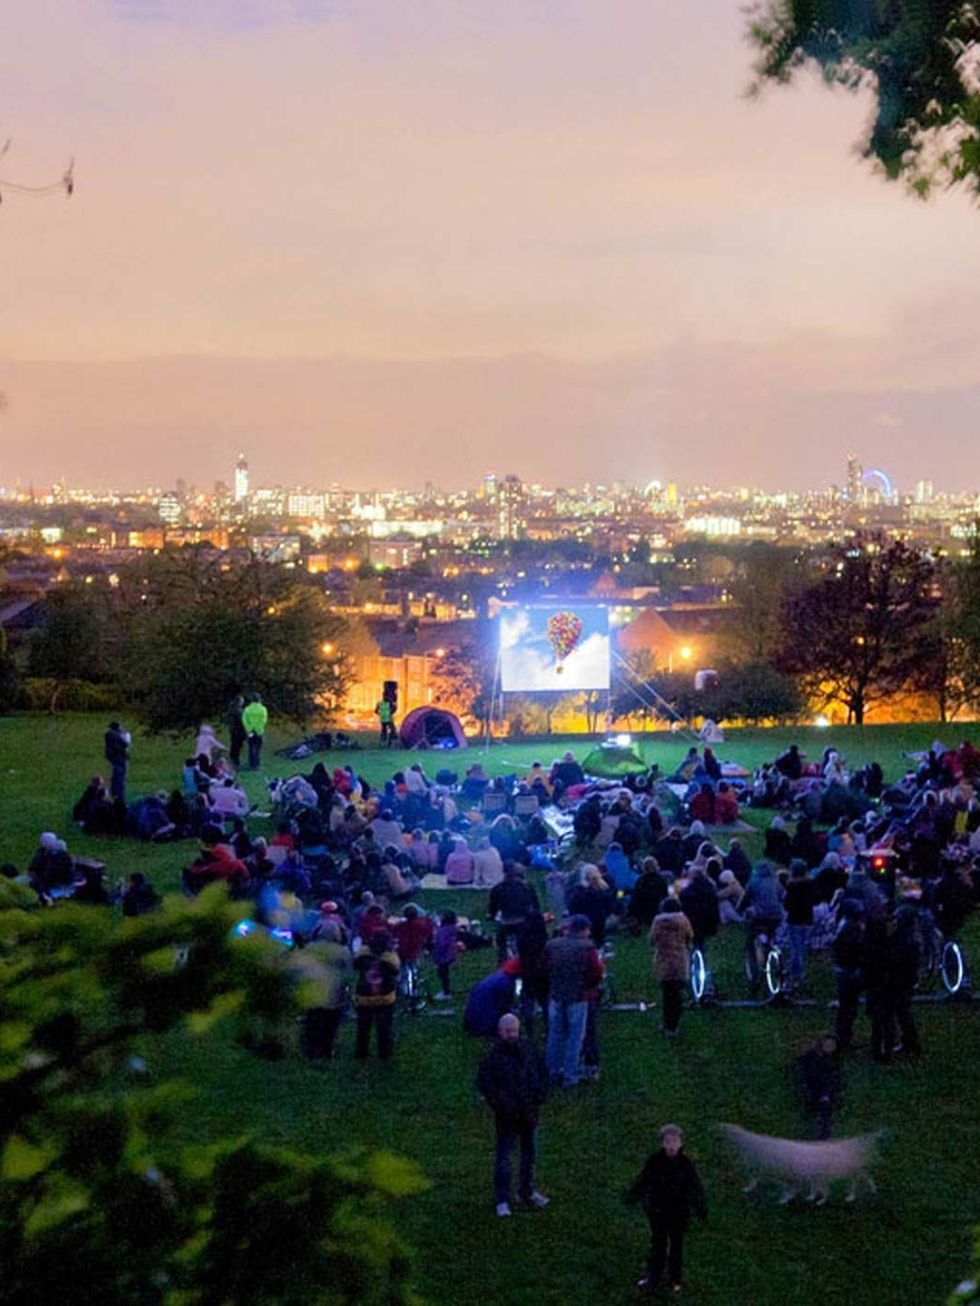 <p><strong>Peckham and Nunhead Free Film Festival</strong></p><p>Peckham and Nunheads free film festival has returned for its fourth year. The eclectic programme of films includes <em>Edward Scissorhands</em> (powered by bikes!), <em>Skyfall</em> and <em